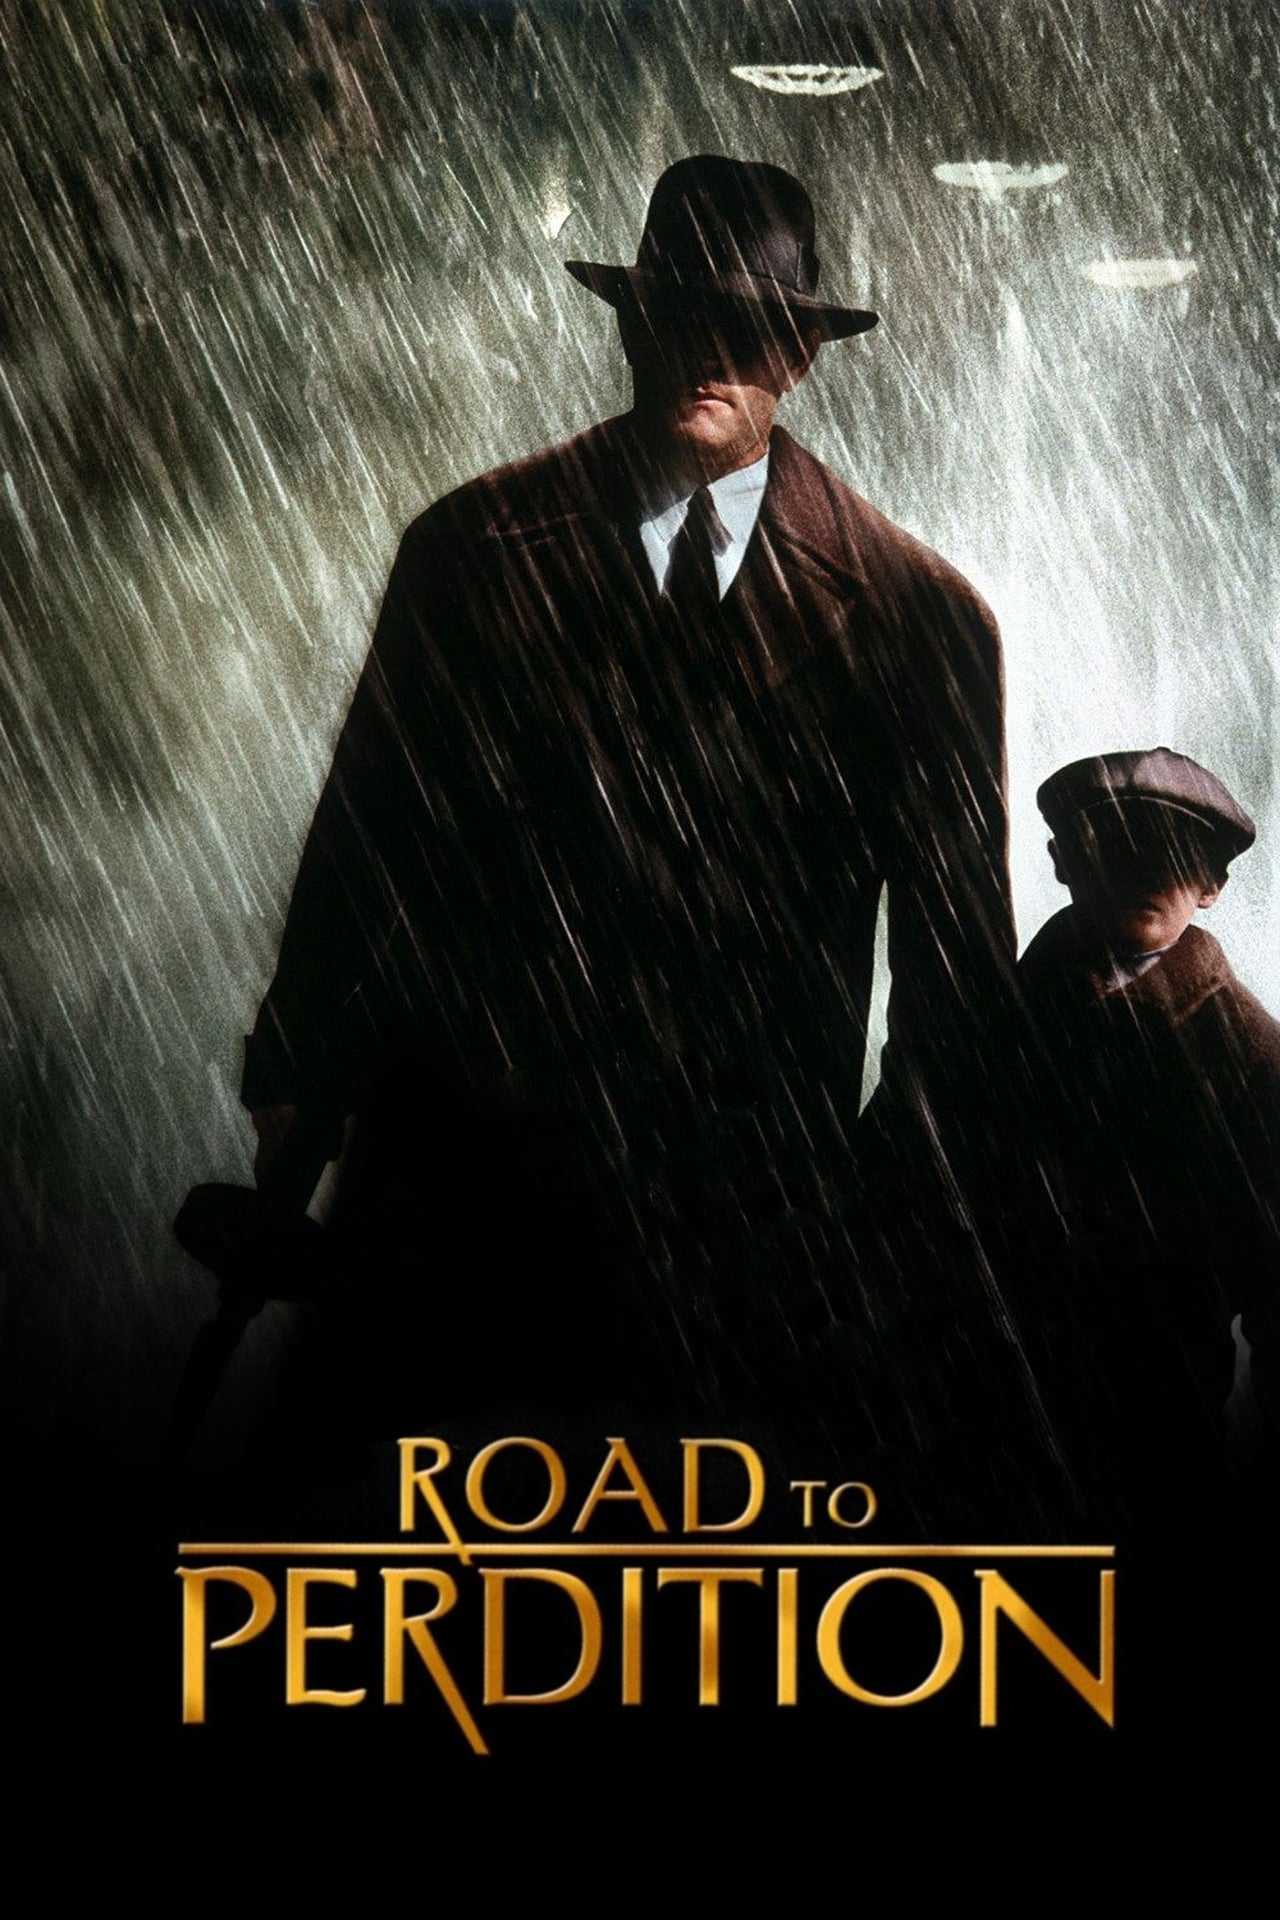 Con đường diệt vong - Road to perdition